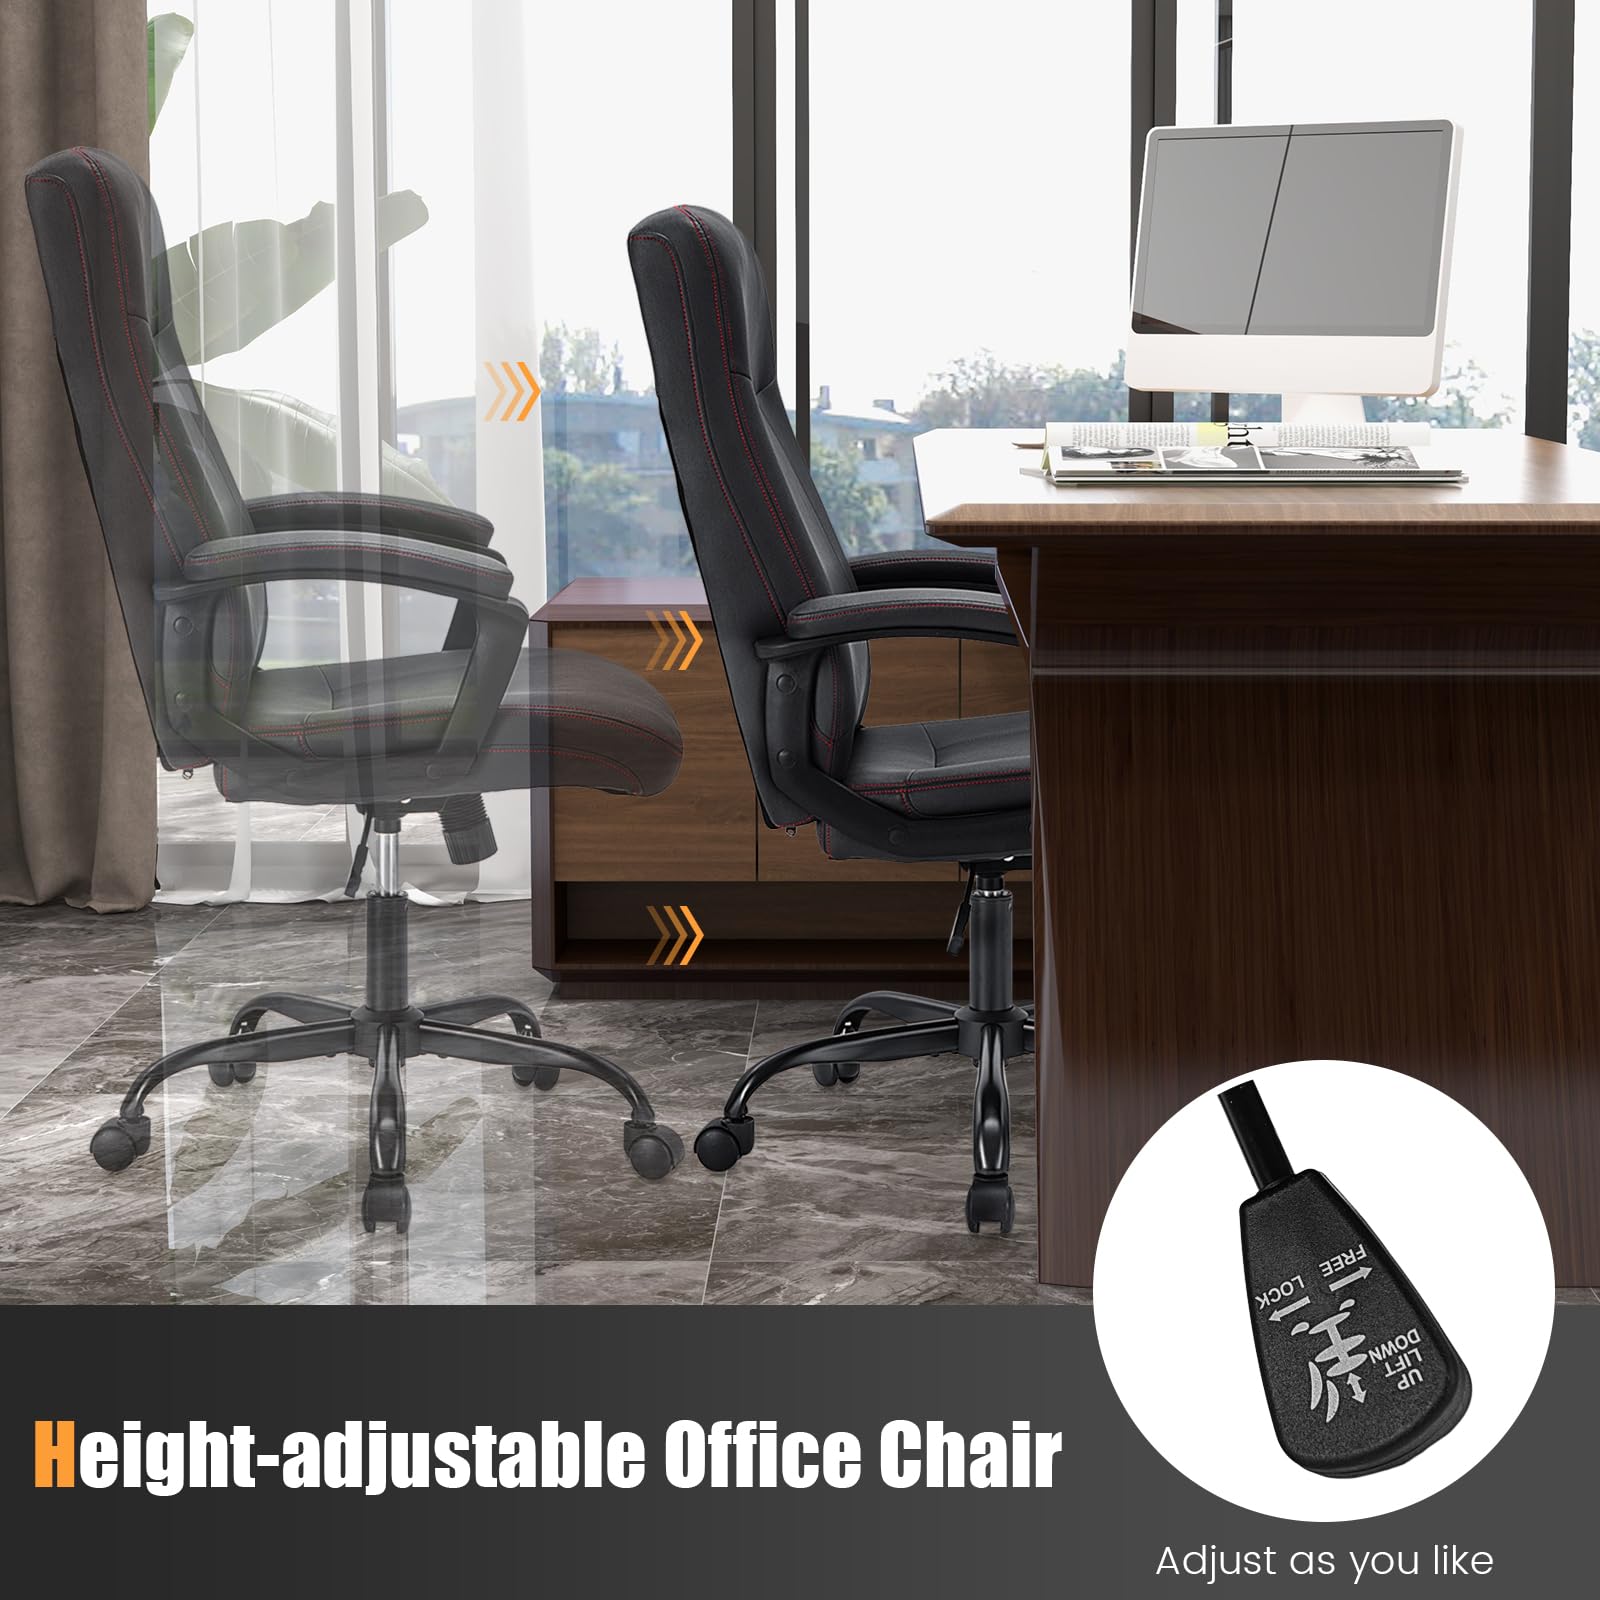 Giantex Executive Office Chair, Ergonomic Home Office Chair, Leather Like Desk Chair with Backrest & Built-in Armrests, Black